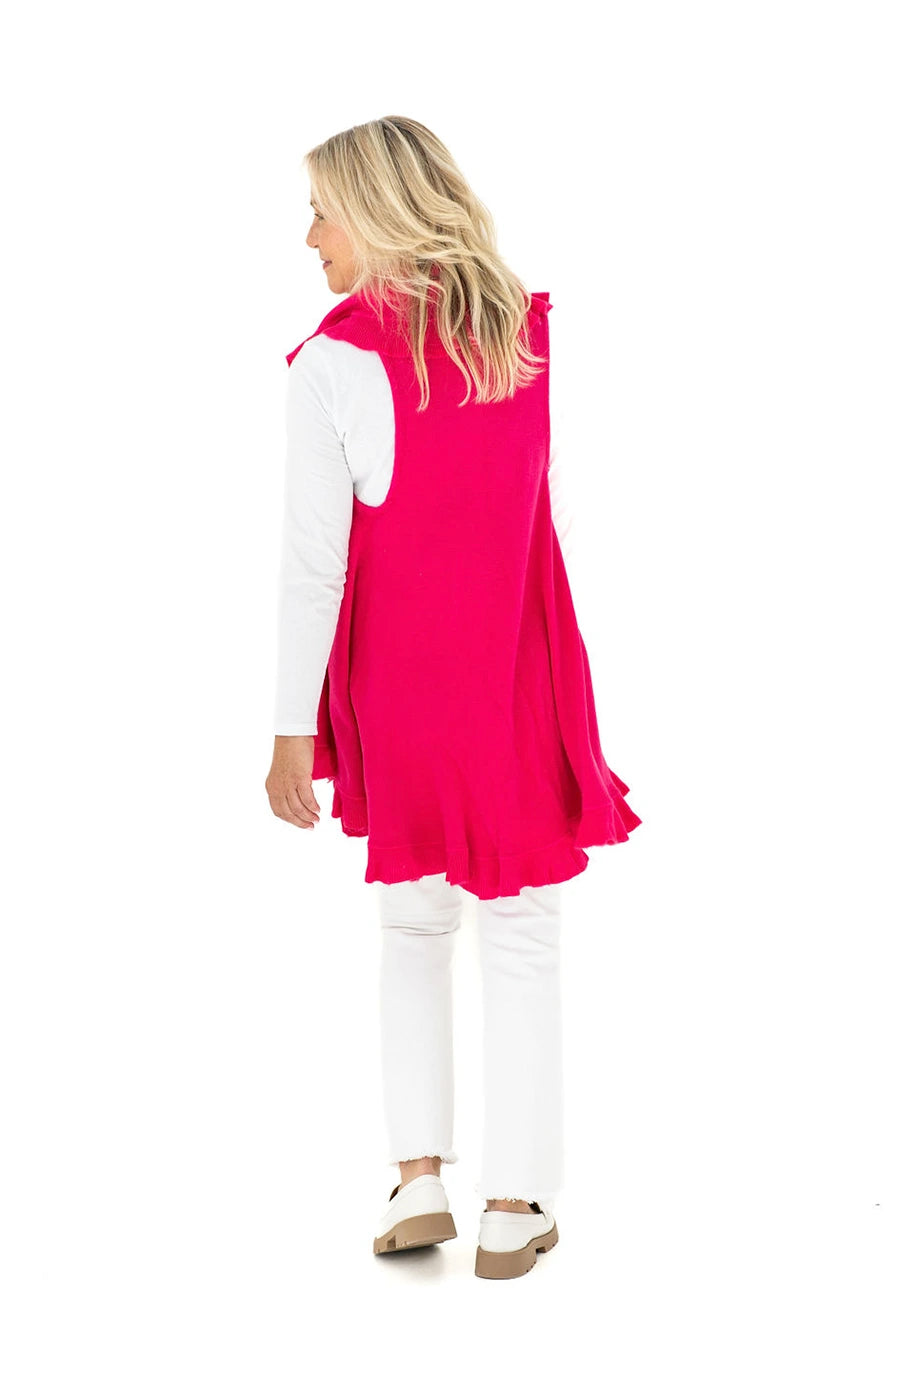 Shawl Sweater Vest in Hot Pink with Ruffle Trim